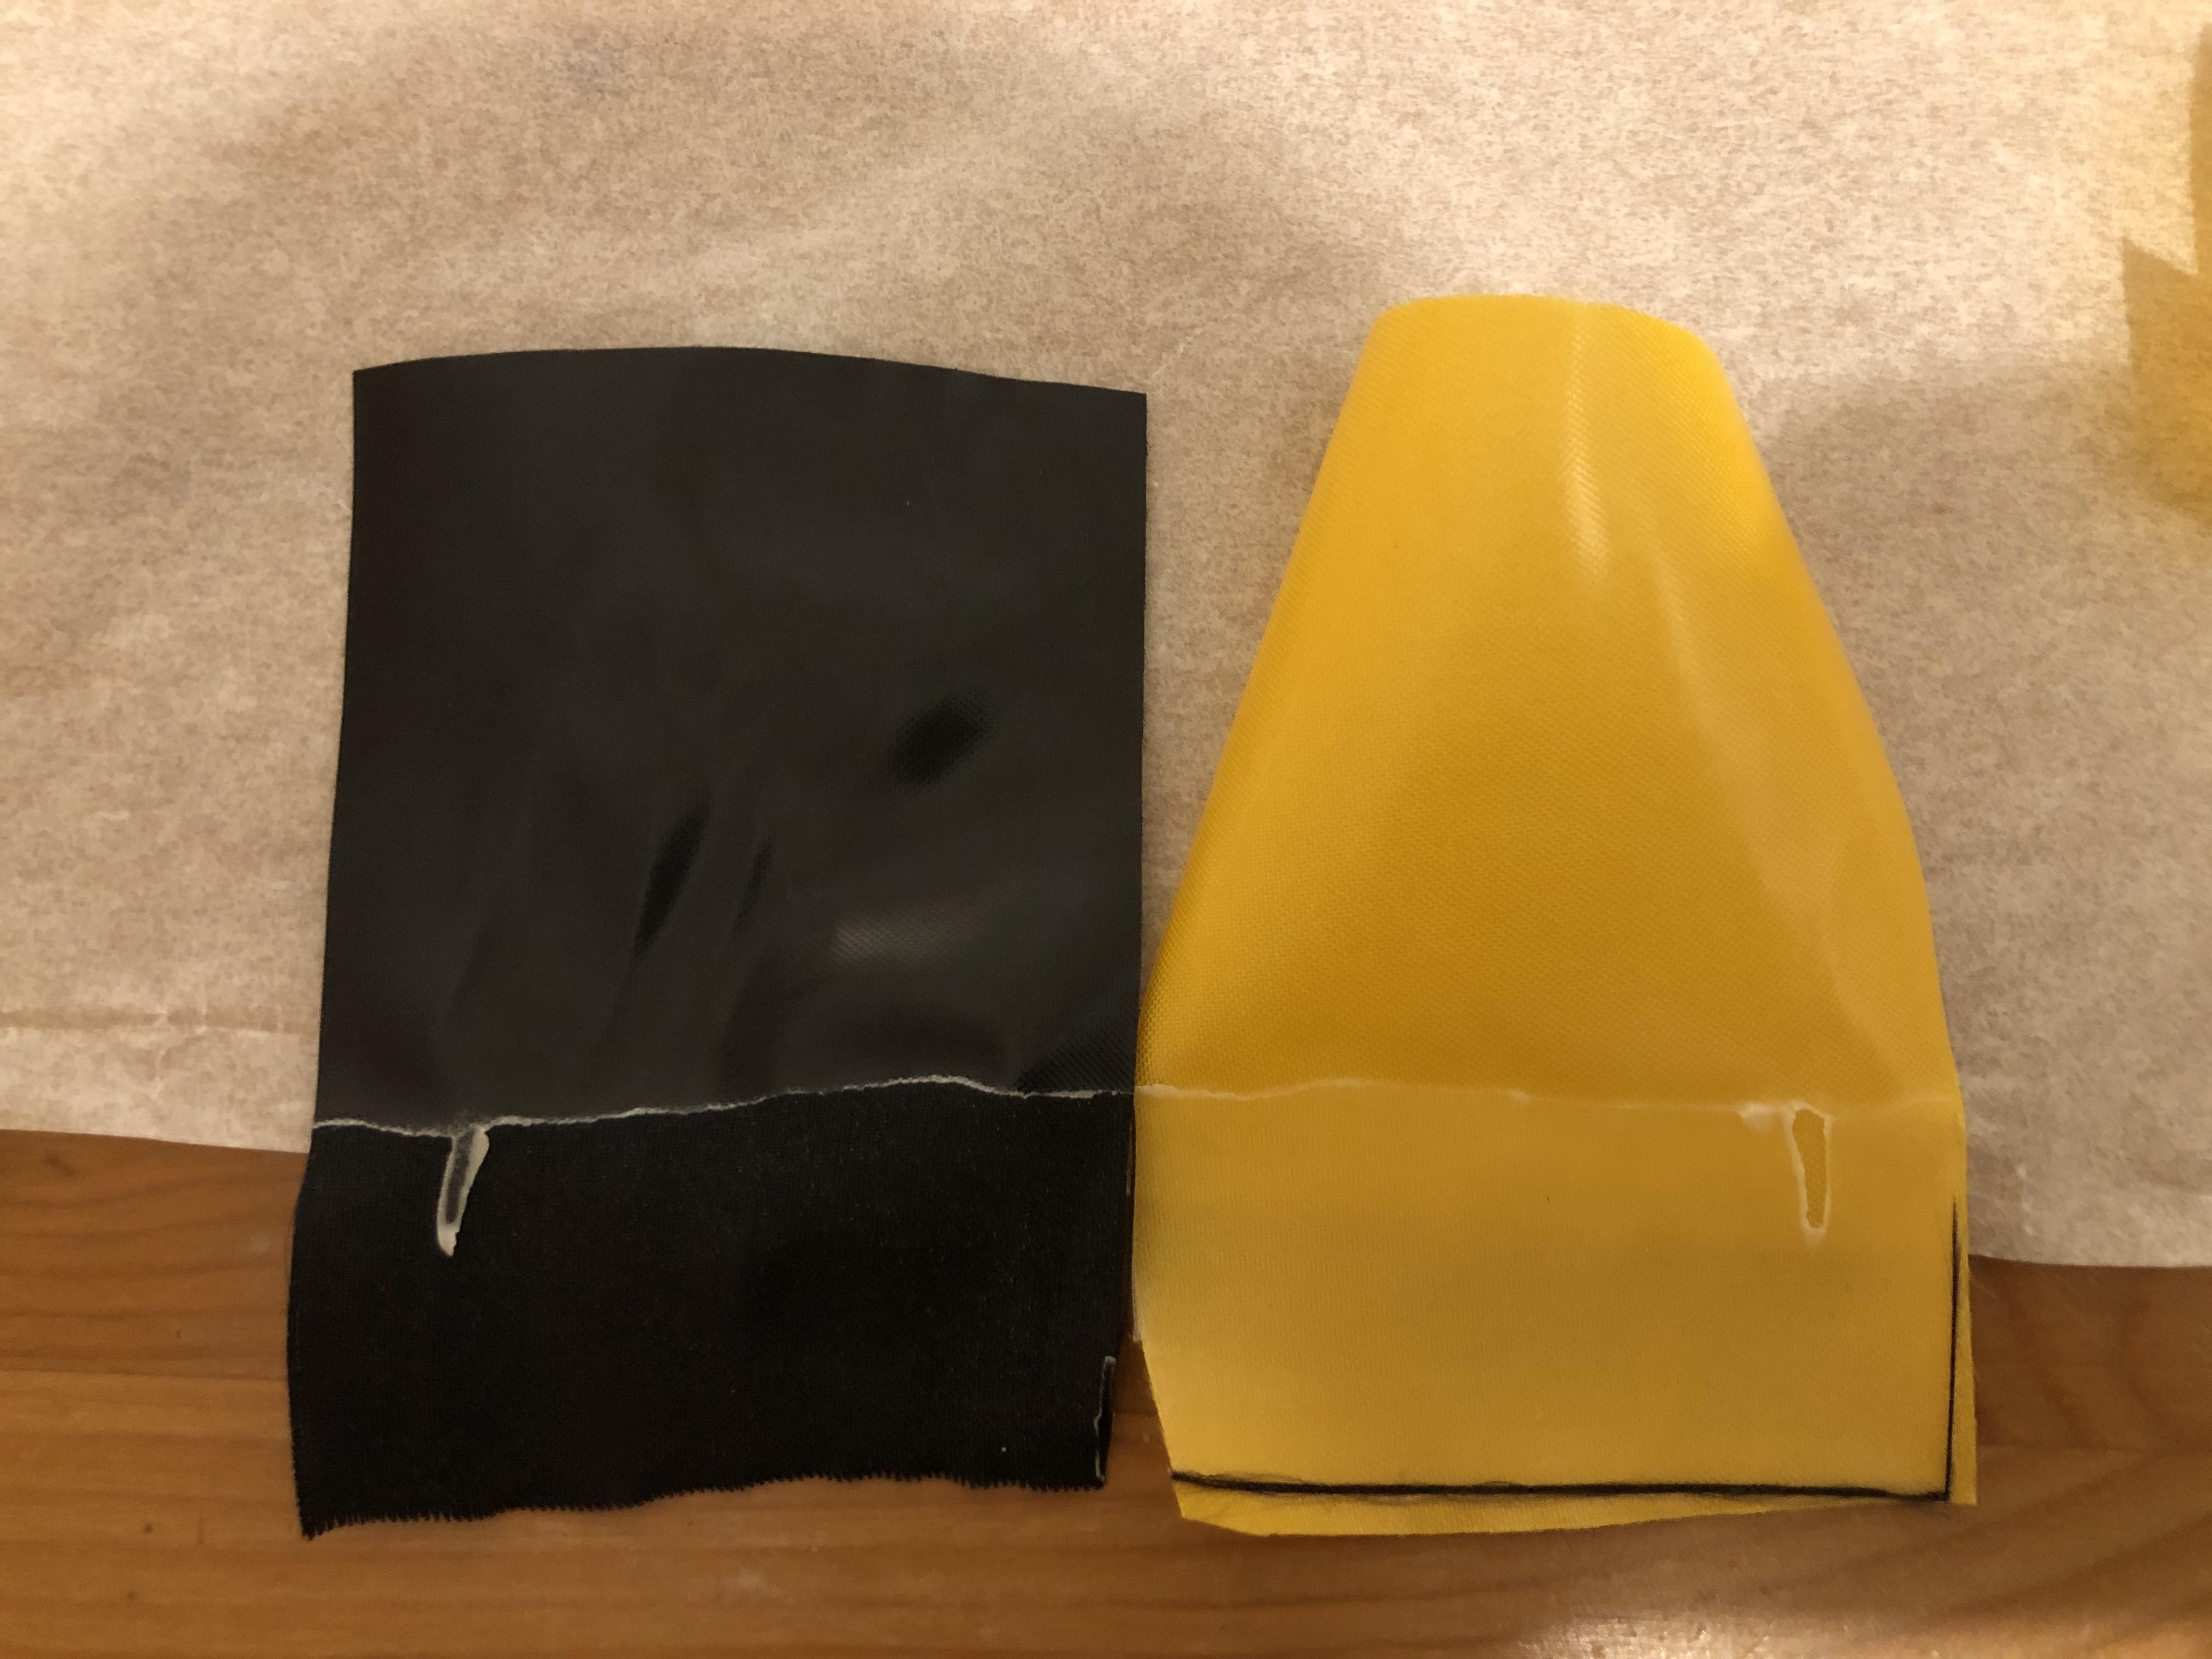 The Silicone Roller: my new favorite tool - DIY Packraft